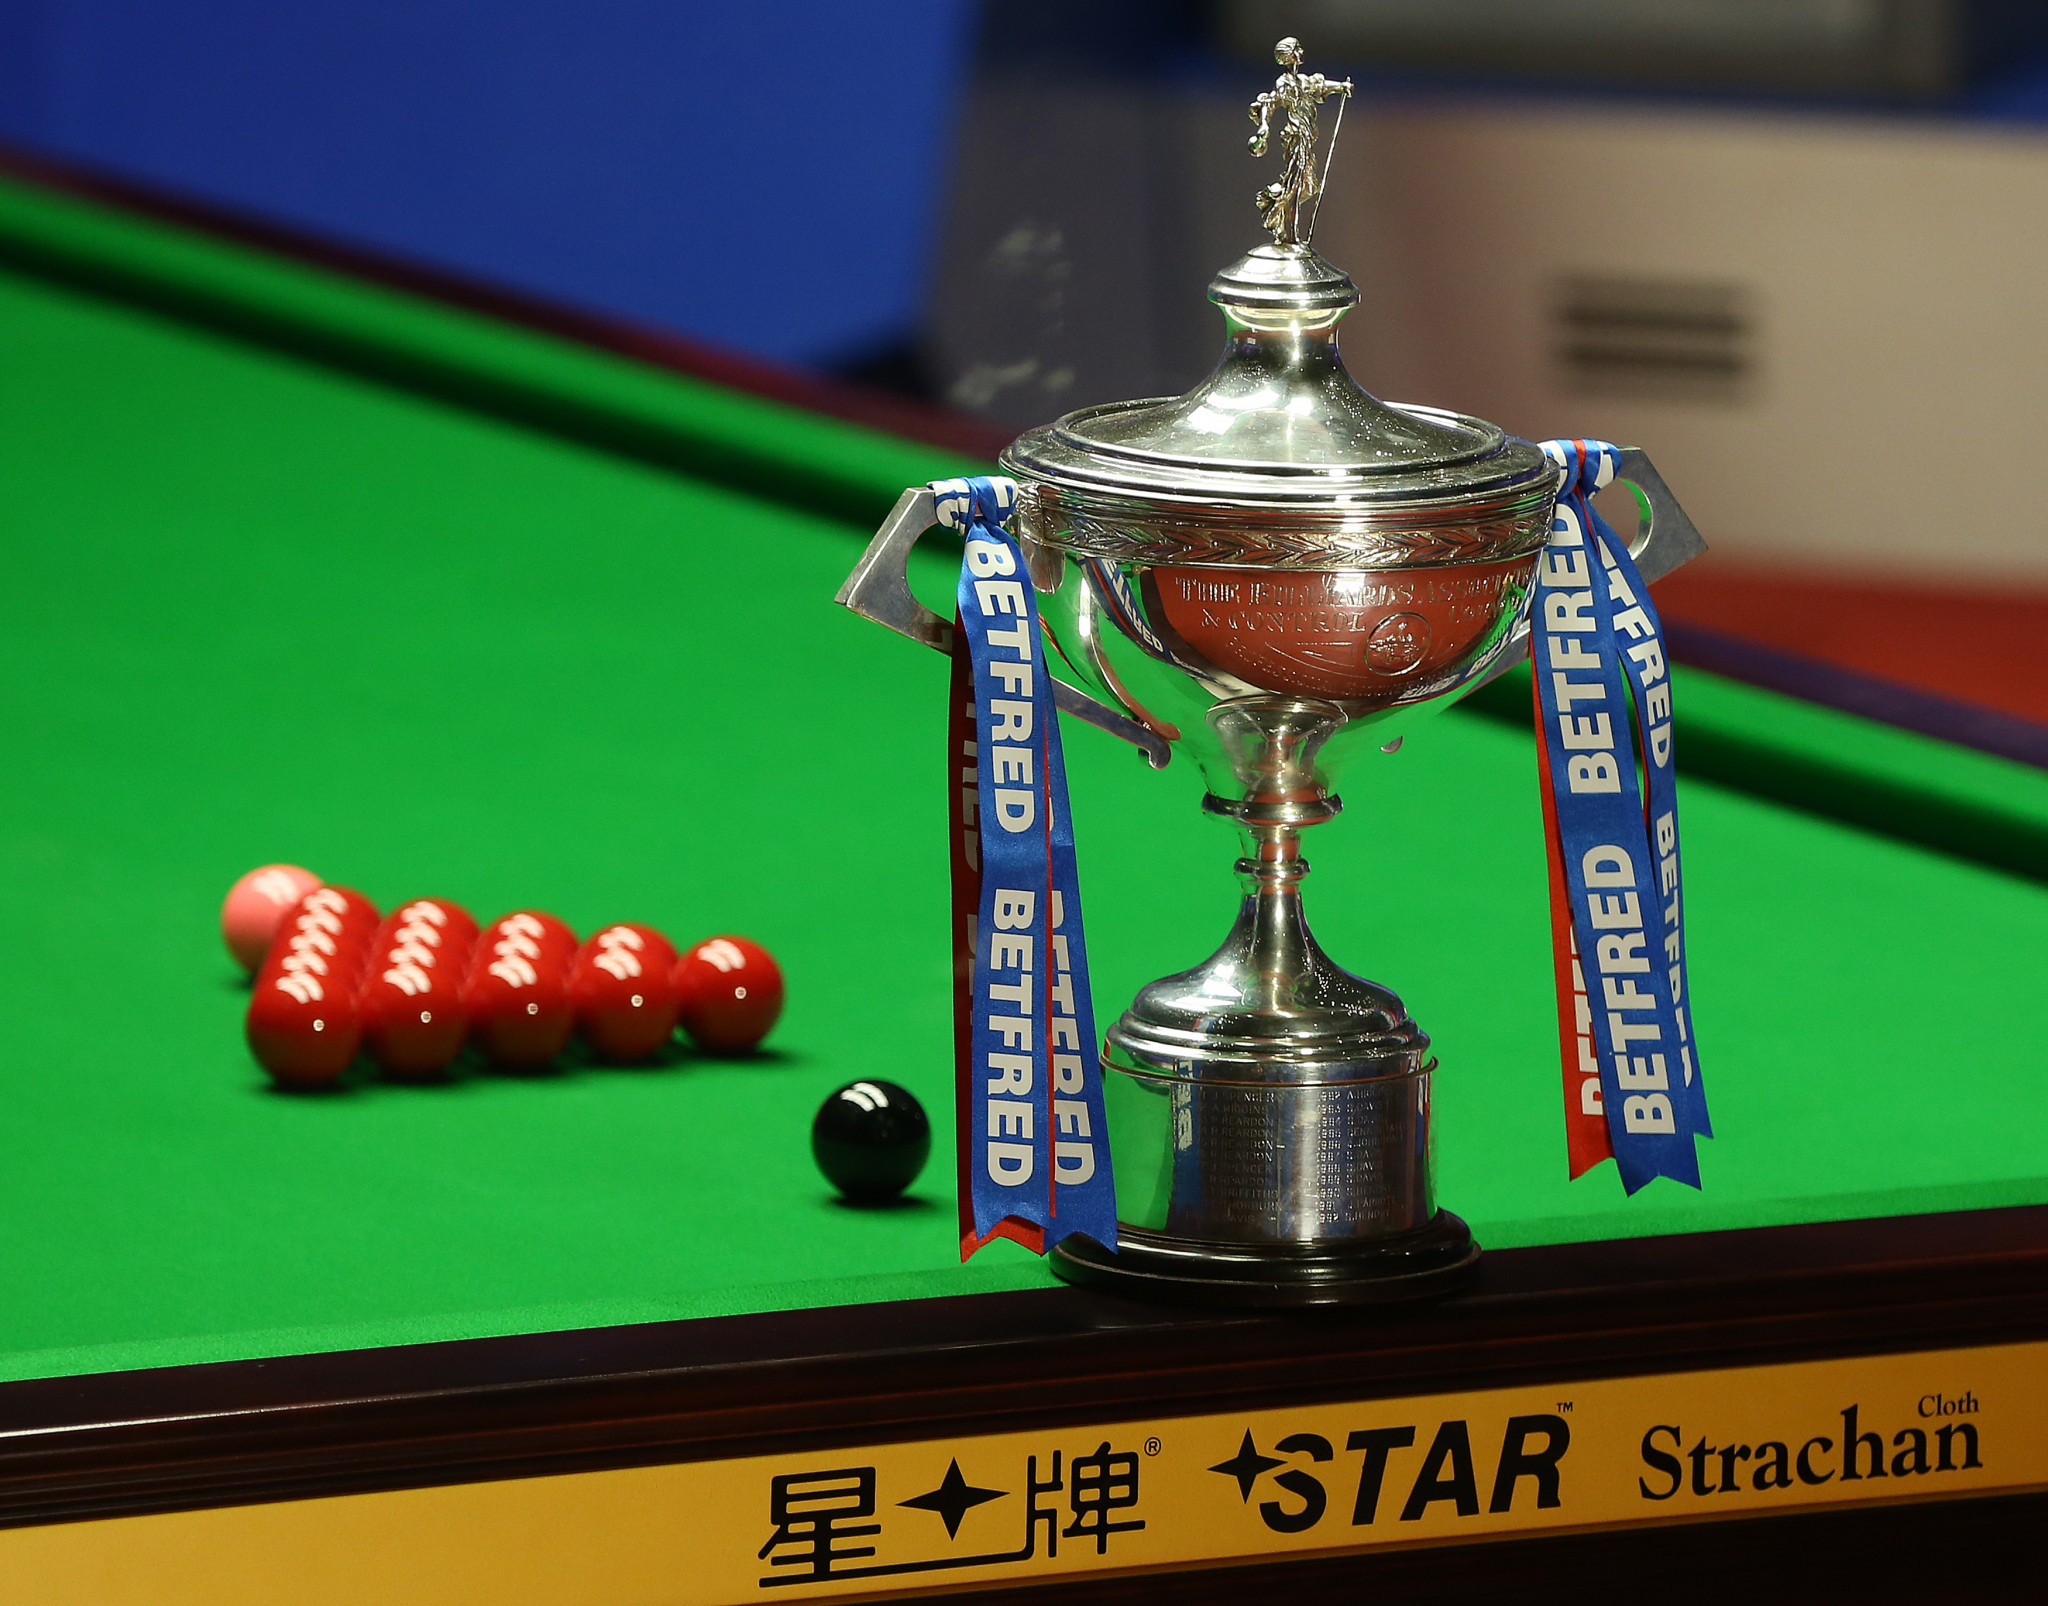 No fans at World Snooker Championship from day two as defending champion Trump advances on opening day